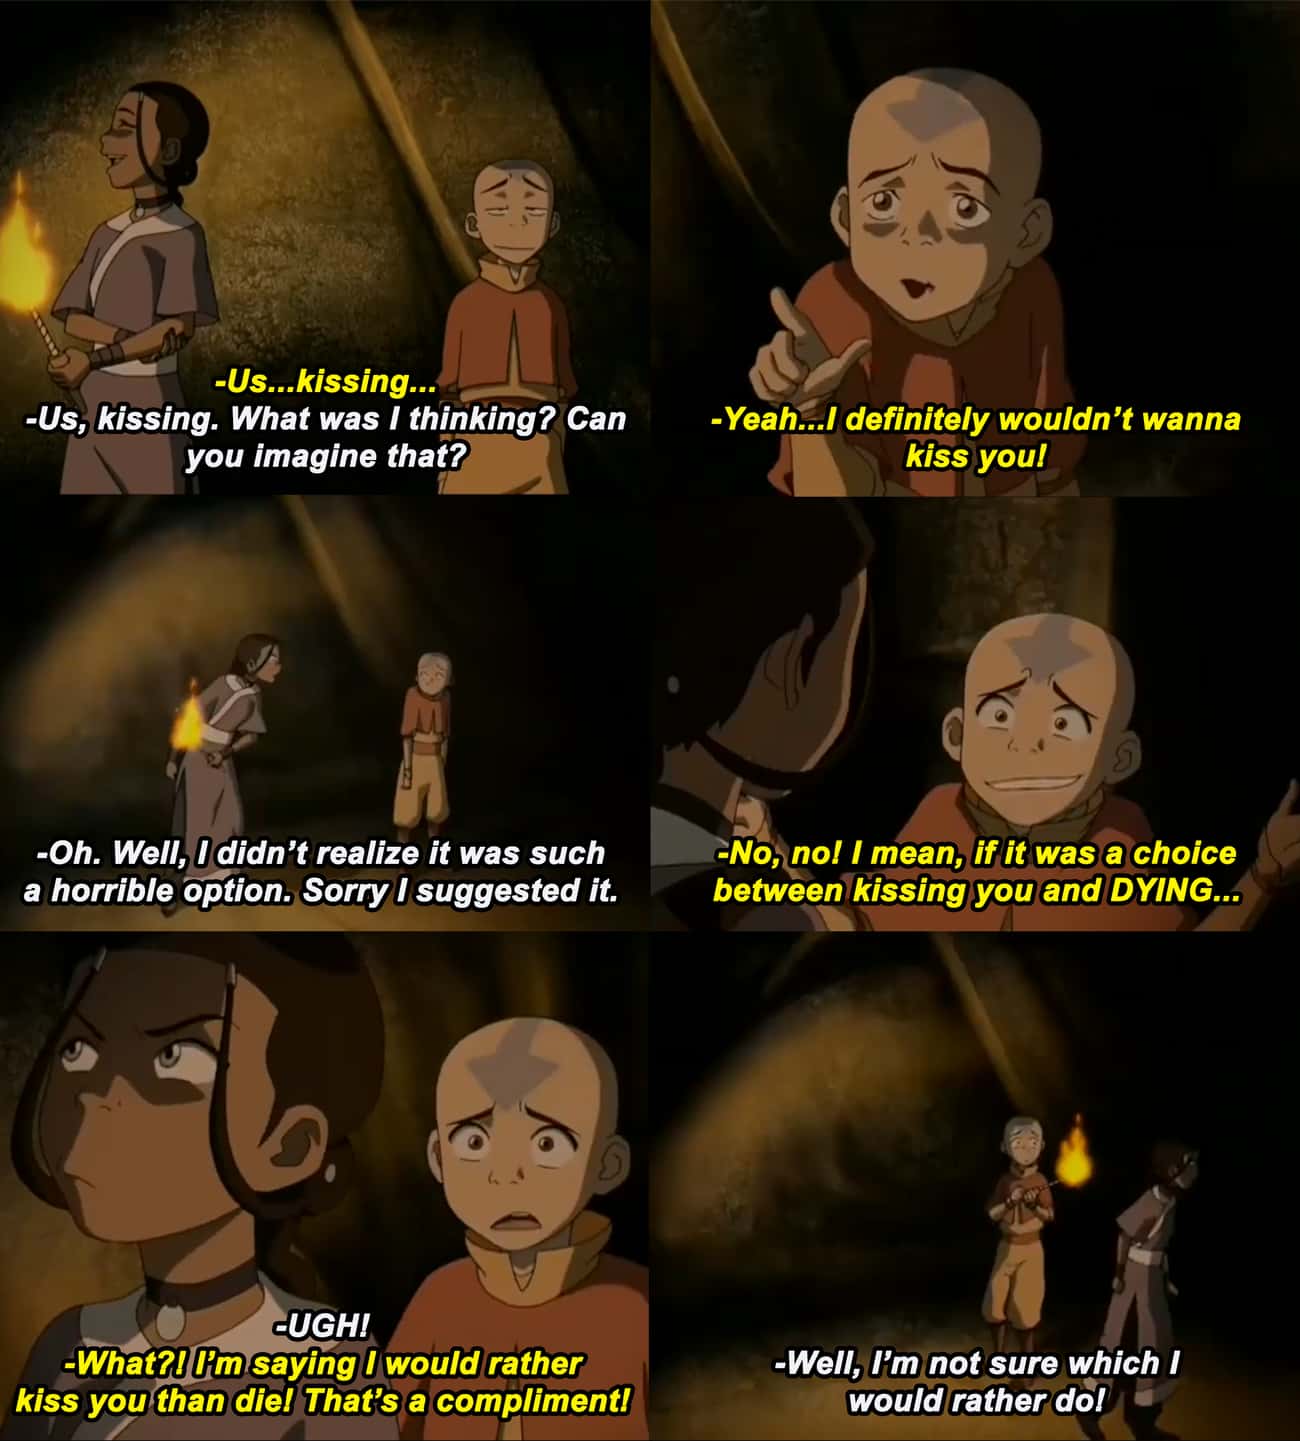 Avatar Aang Morphs Into Awkward Twelve-Year-Old Aang In The Cave Of Two Lovers